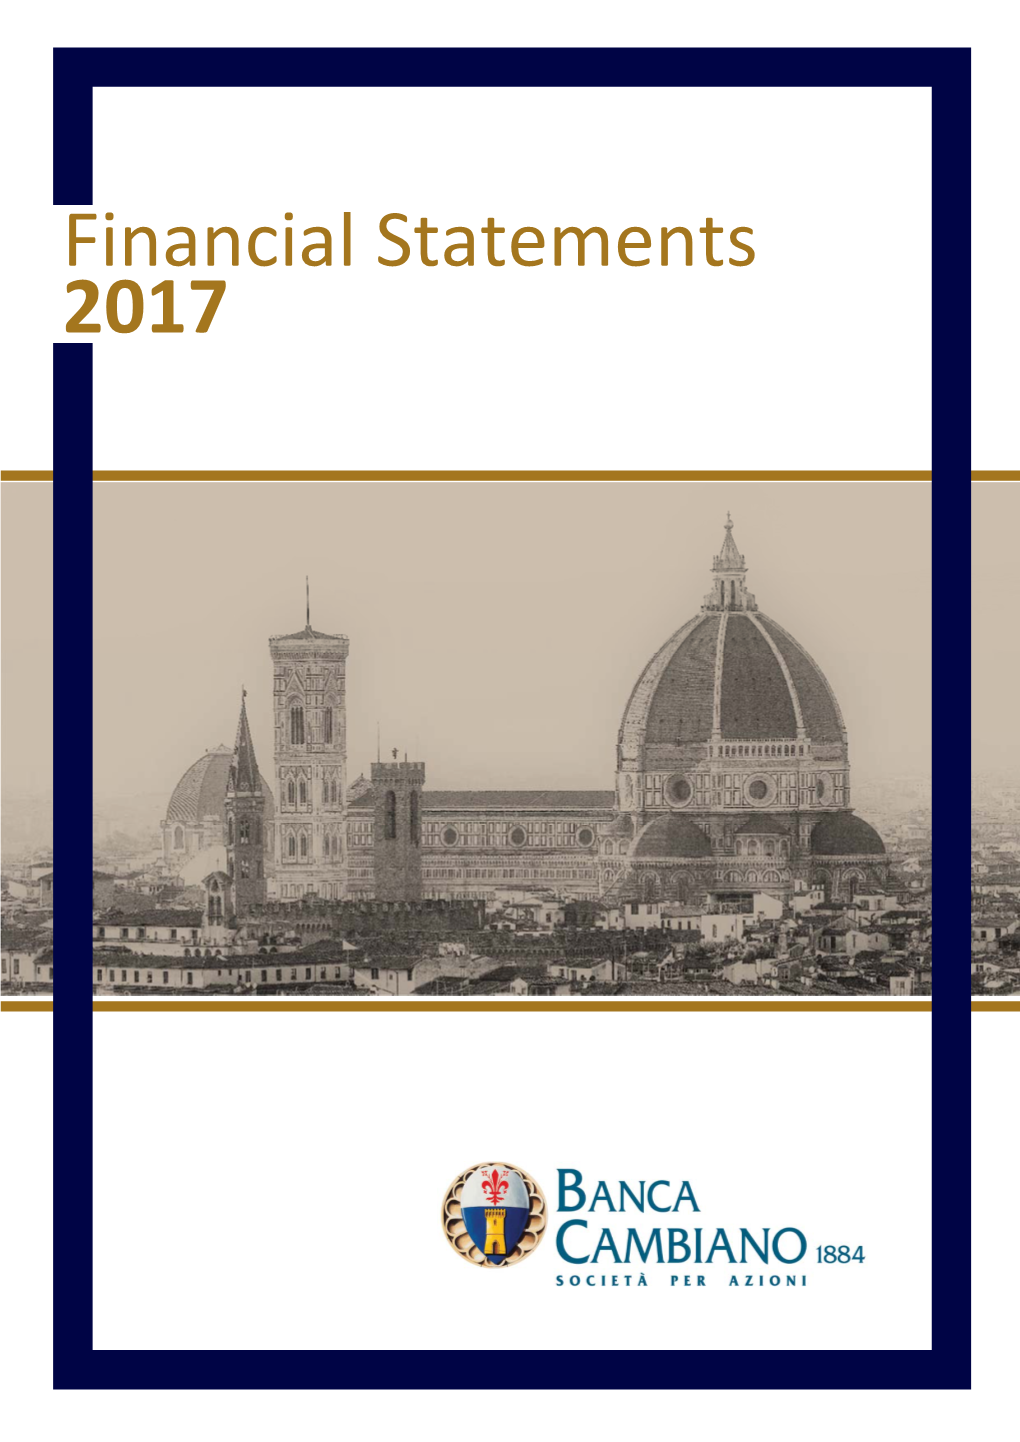 Report and Financial Statements for Fiscal Year 2017